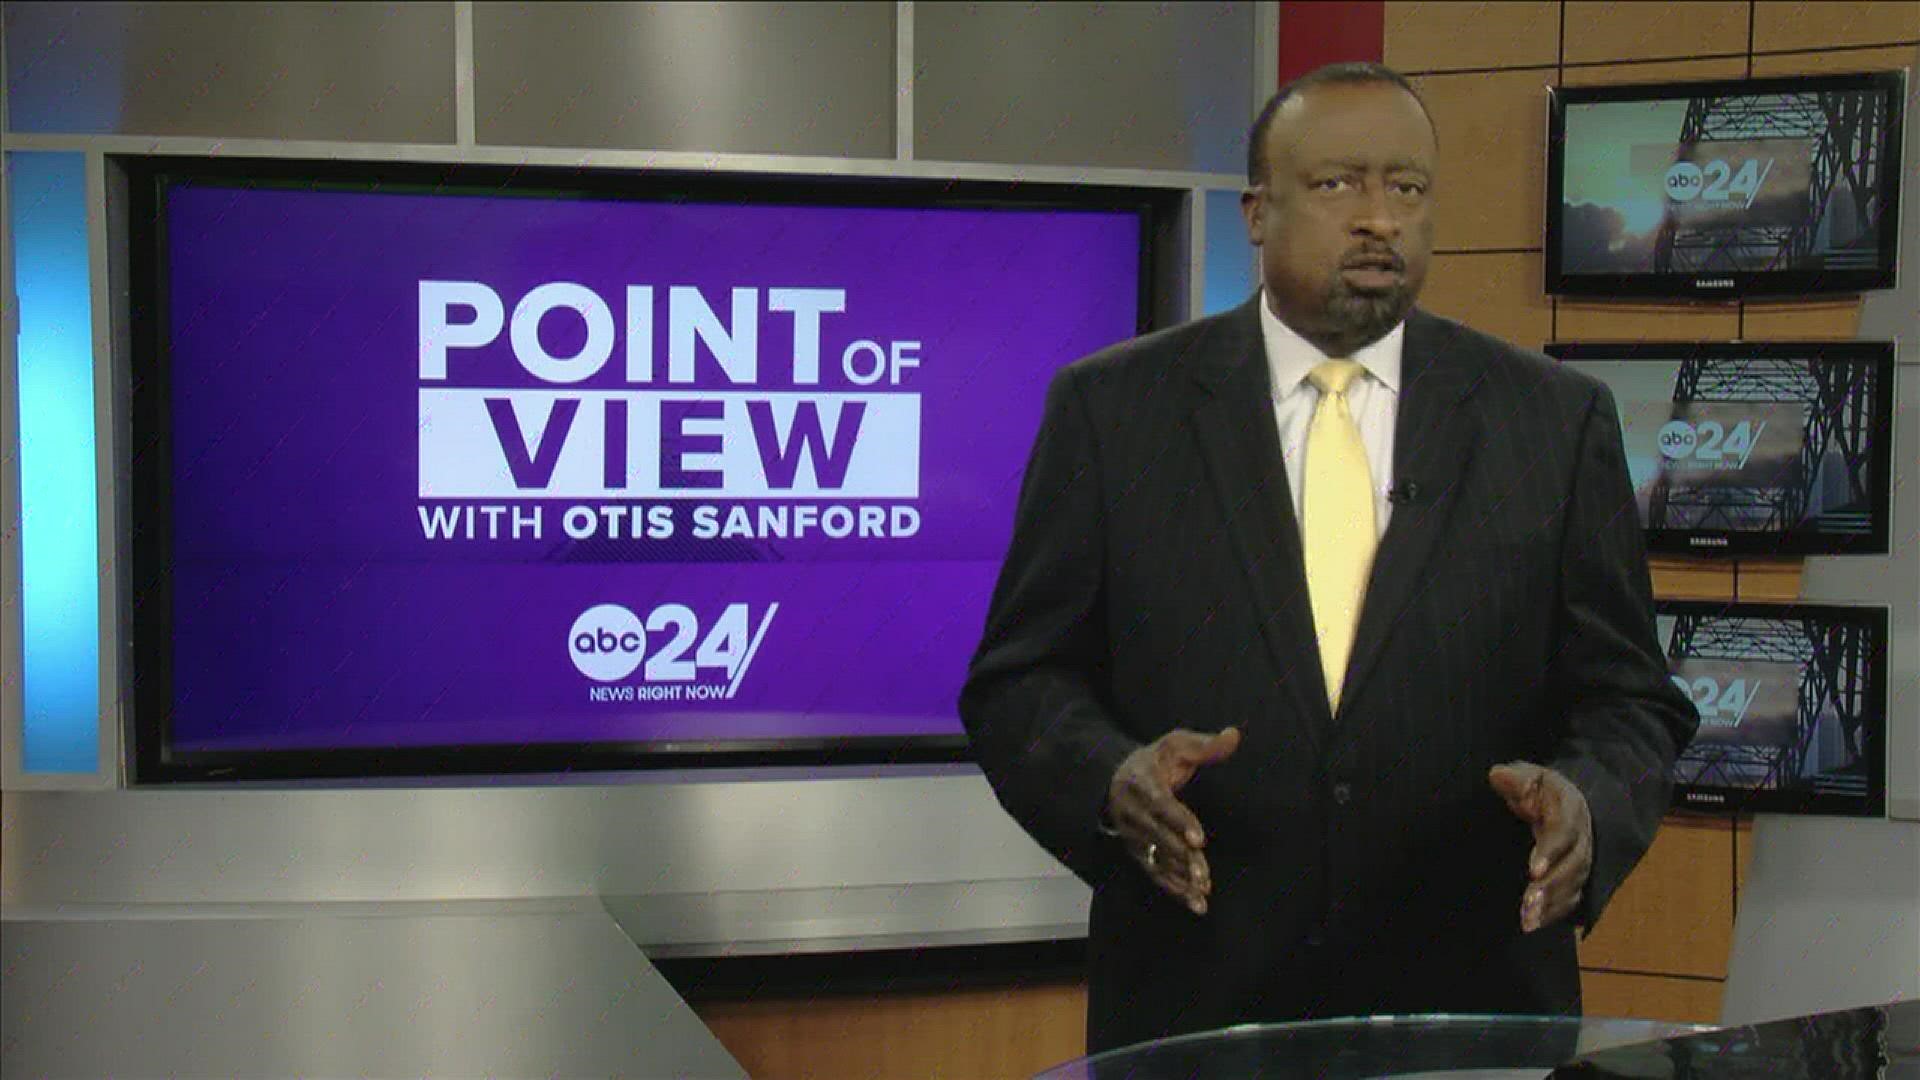 ABC24 political analyst and commentator Otis Sanford shared his point of view on Mississippi Gov. Tate Reeves and the state's abortion ban.